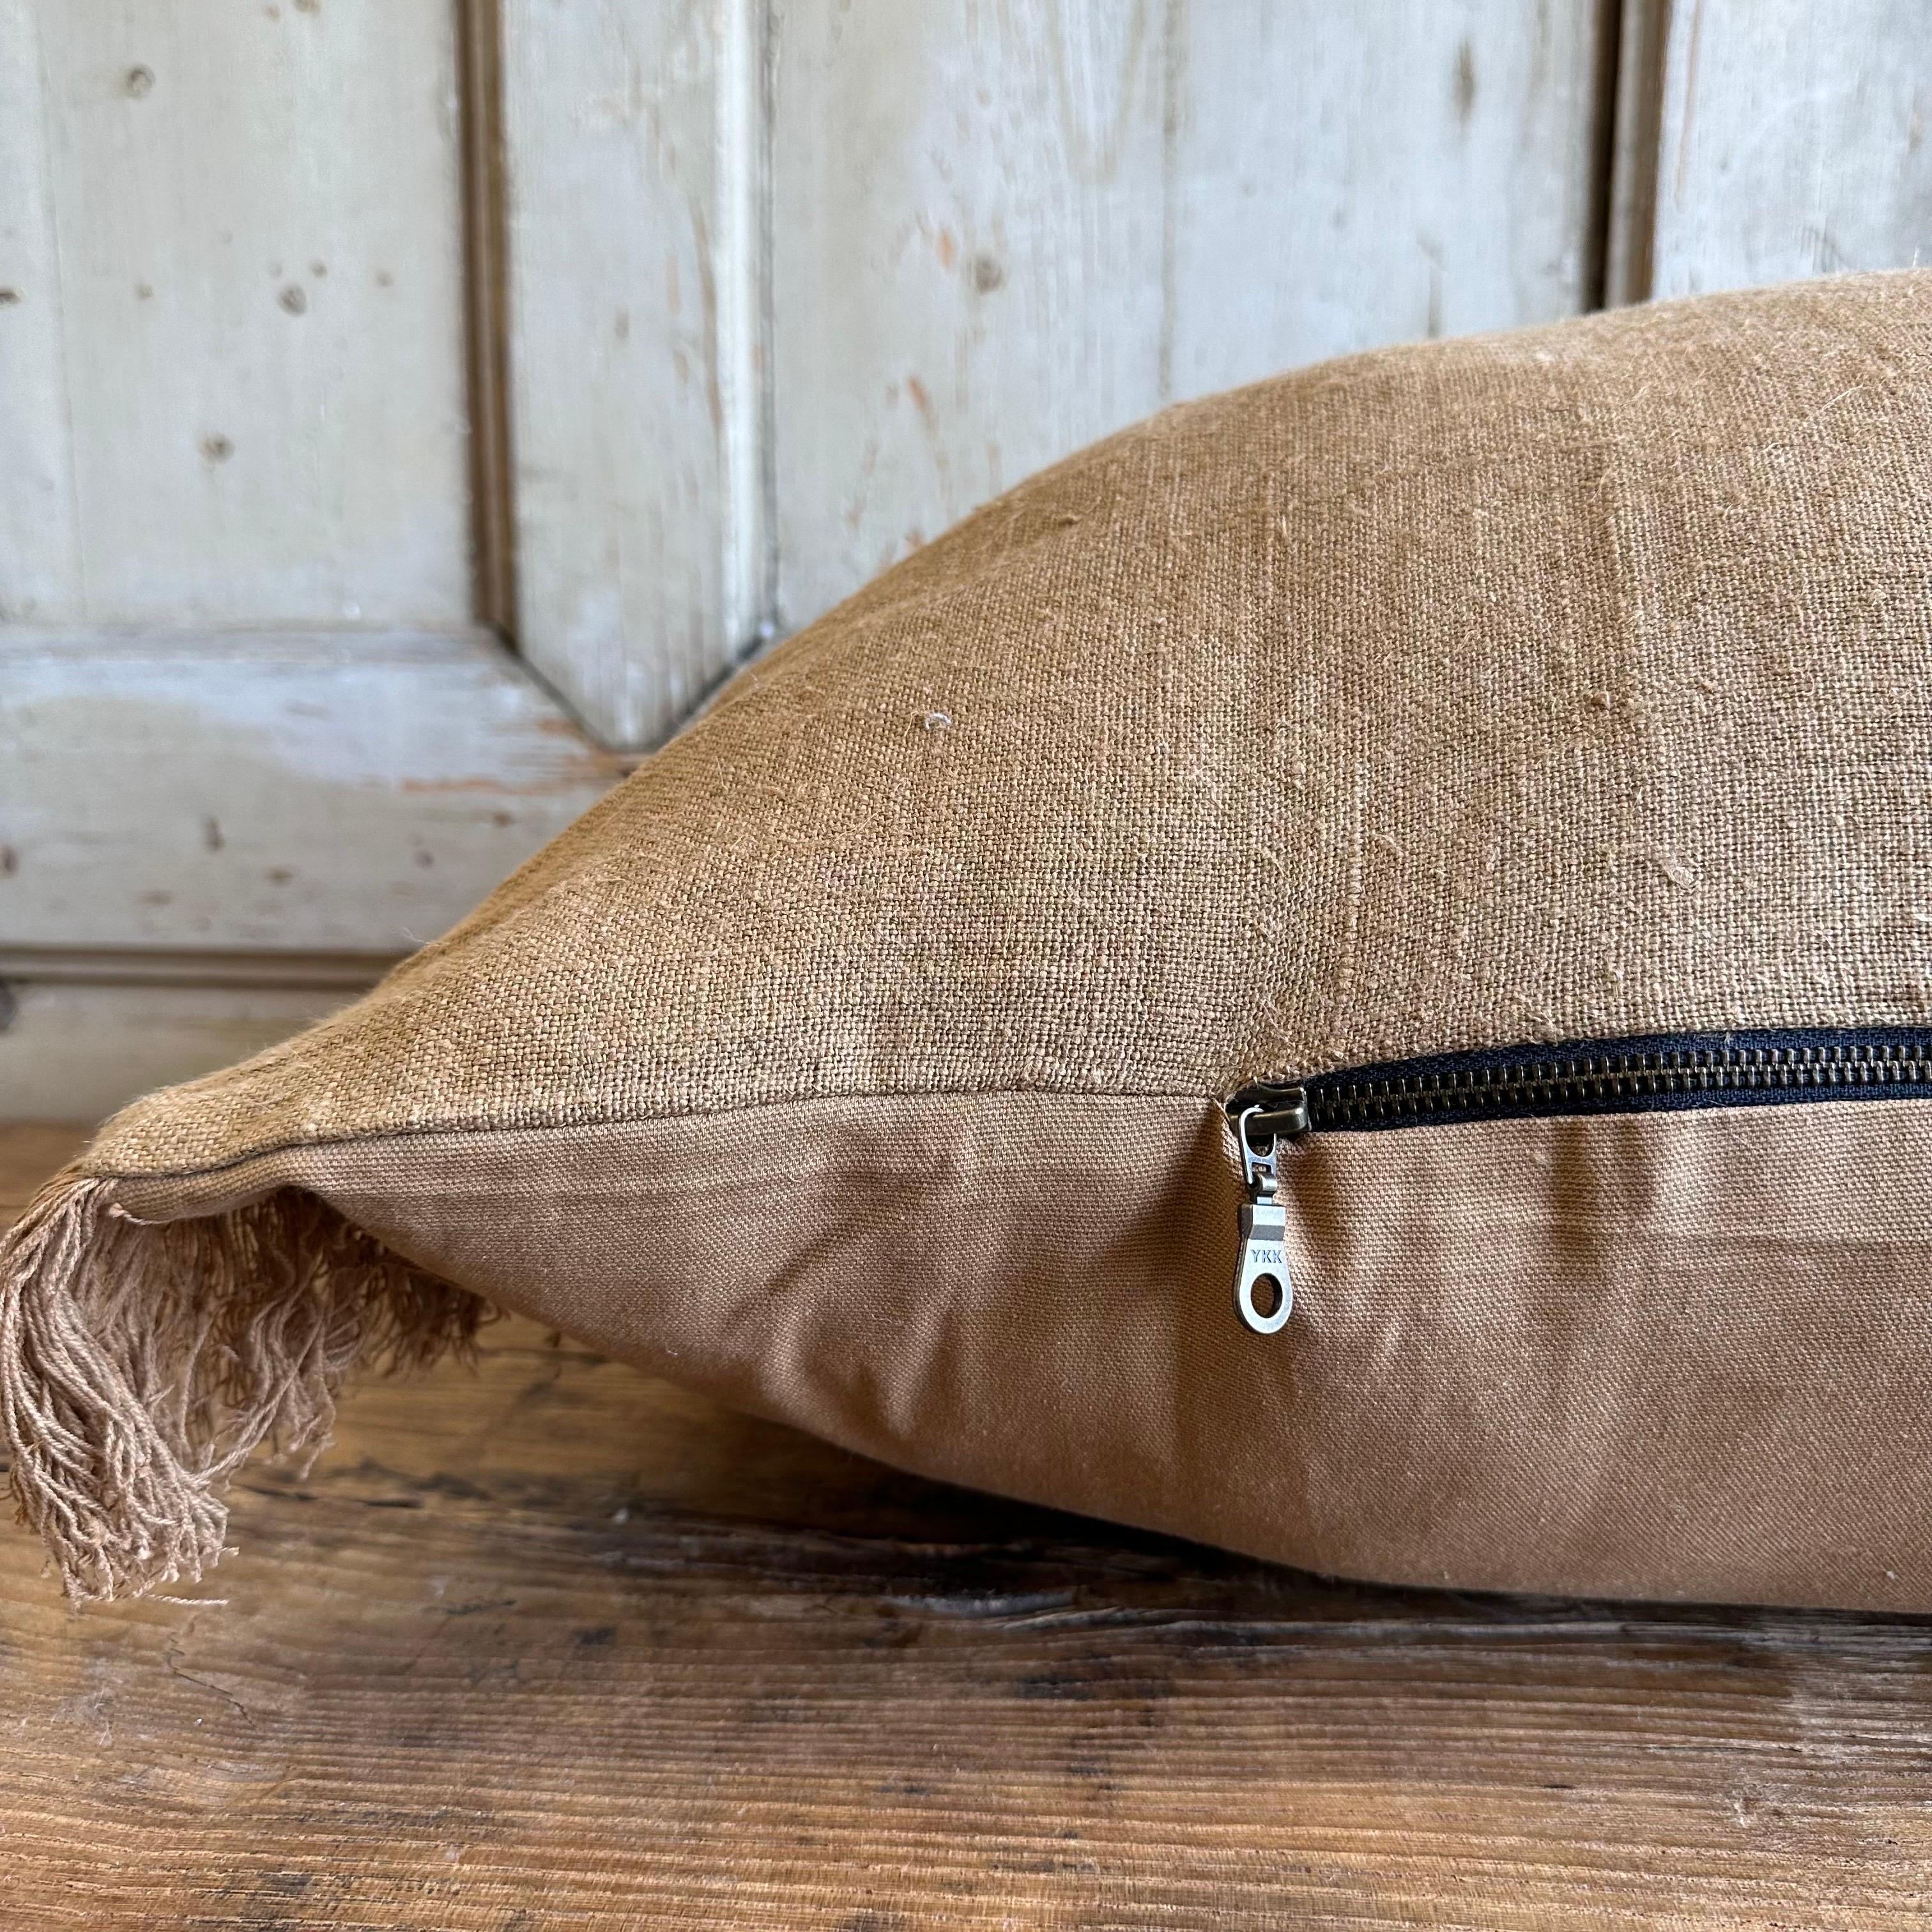 Made in France
Natural linen lumbar, XL king size with zipper closure.
Down insert not included. Please choose insert upon check out.
Size: 22x43x8
Cinnamon colored linen face with fringe edges, the backing is a natural cinnamon cotton fabric